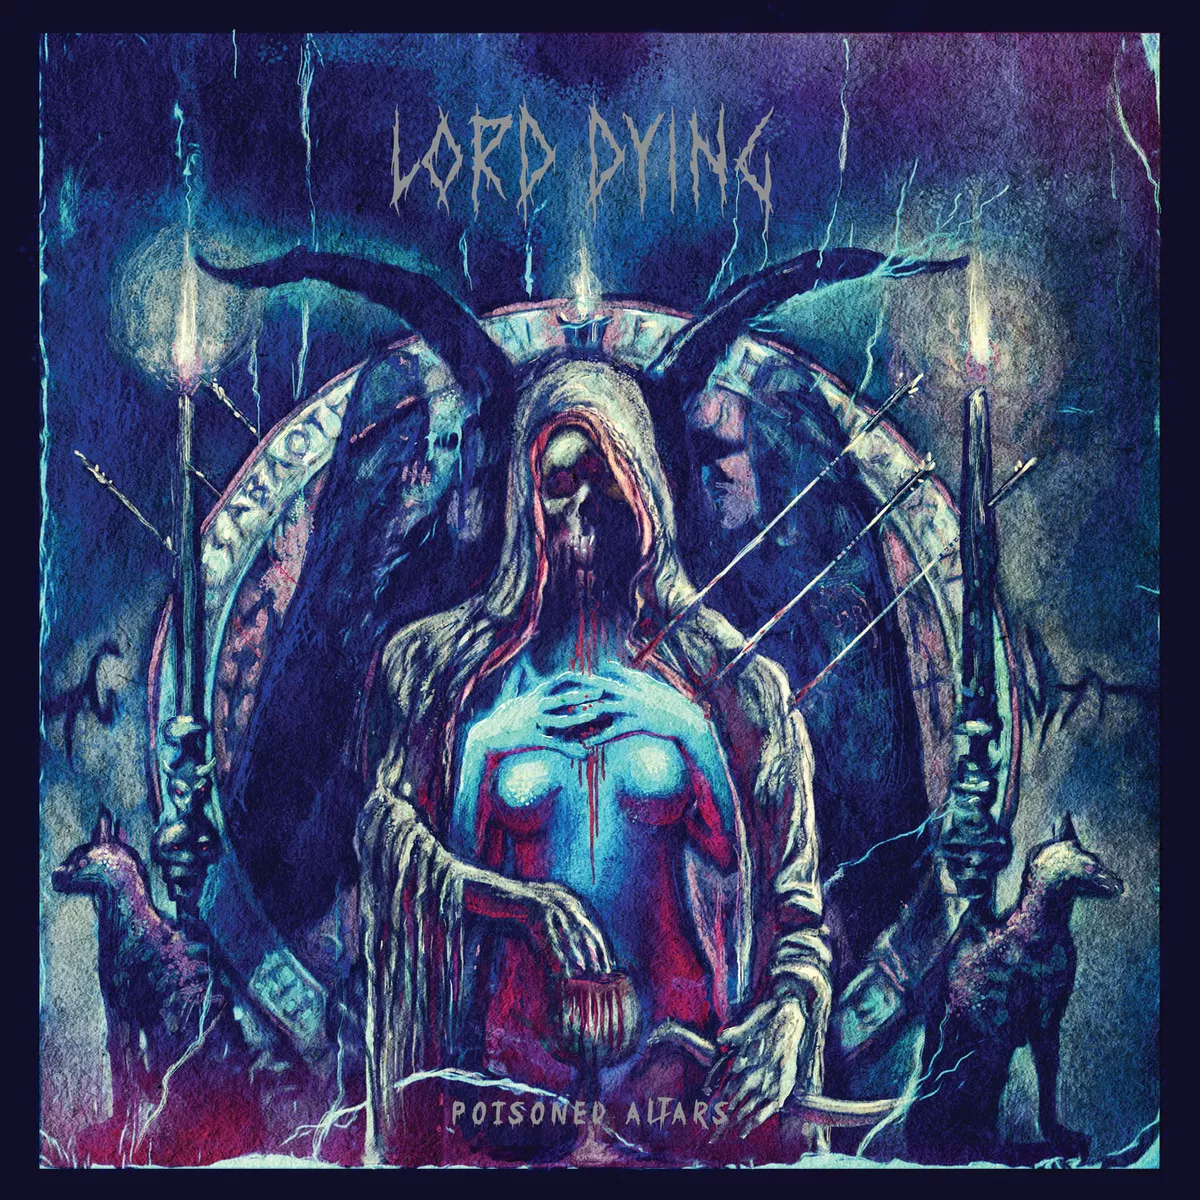 Poisoned Altars - Lord Dying